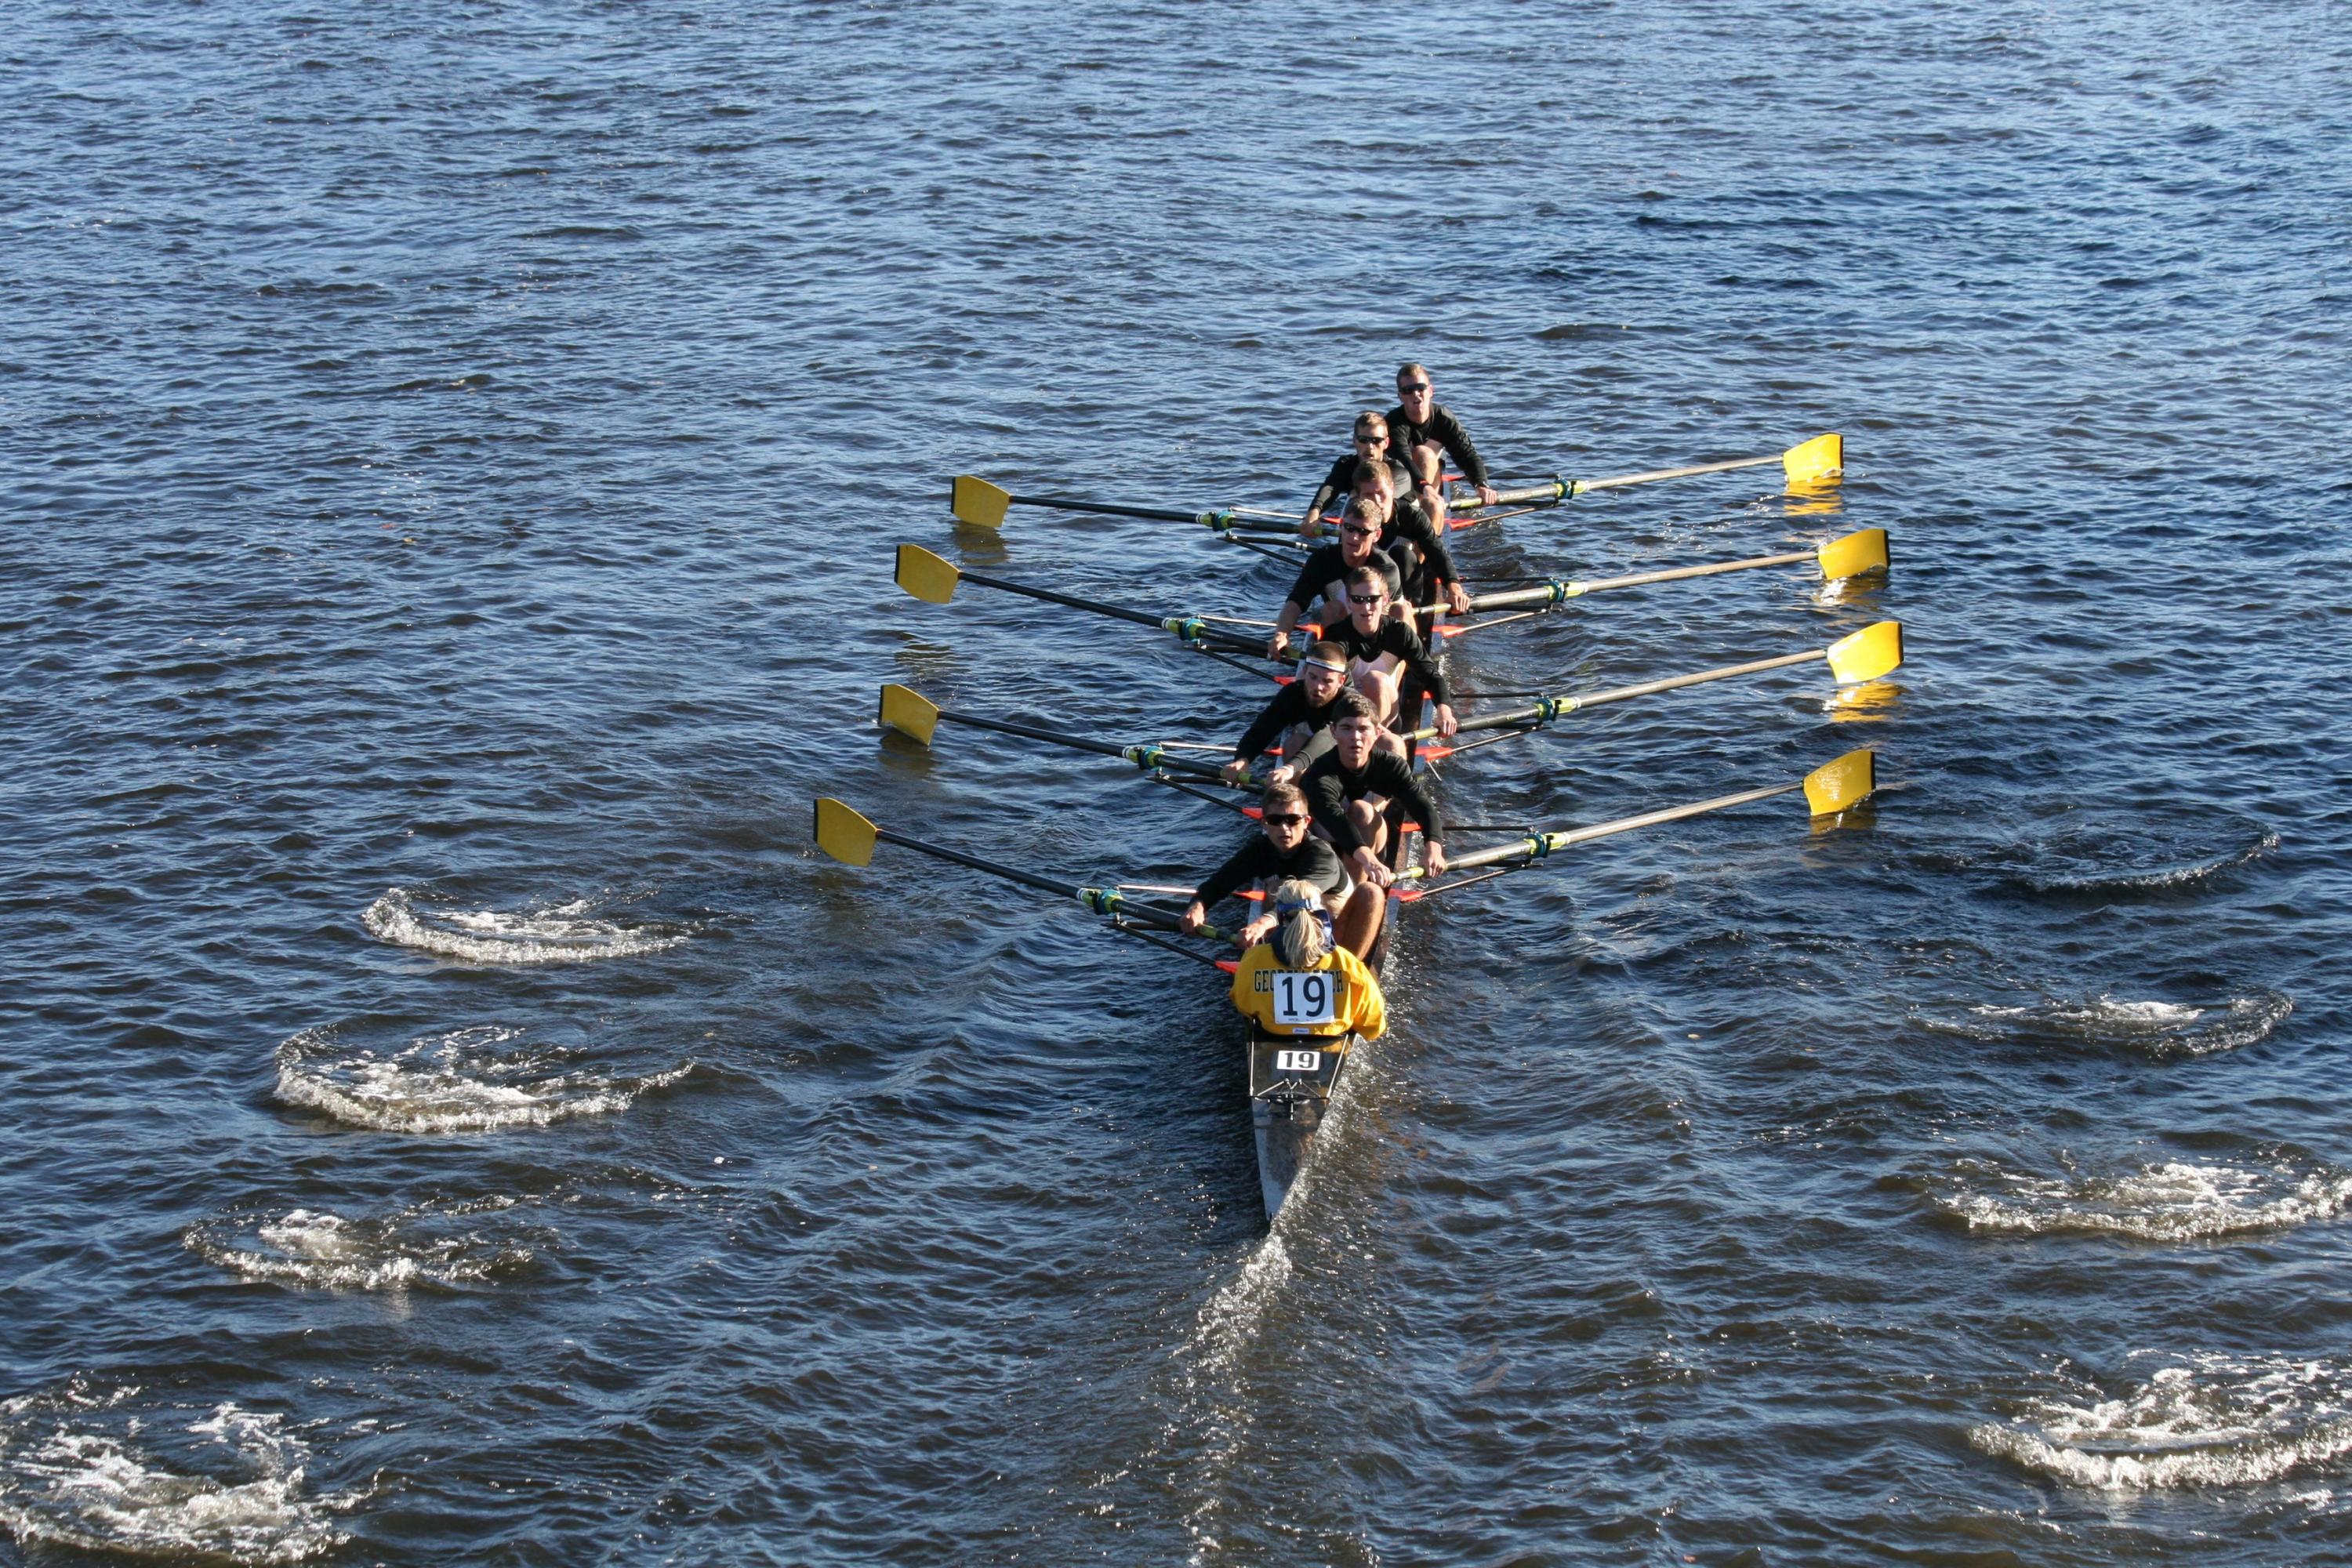 Tech rowers compete at the Head of the Charles event in 2016.